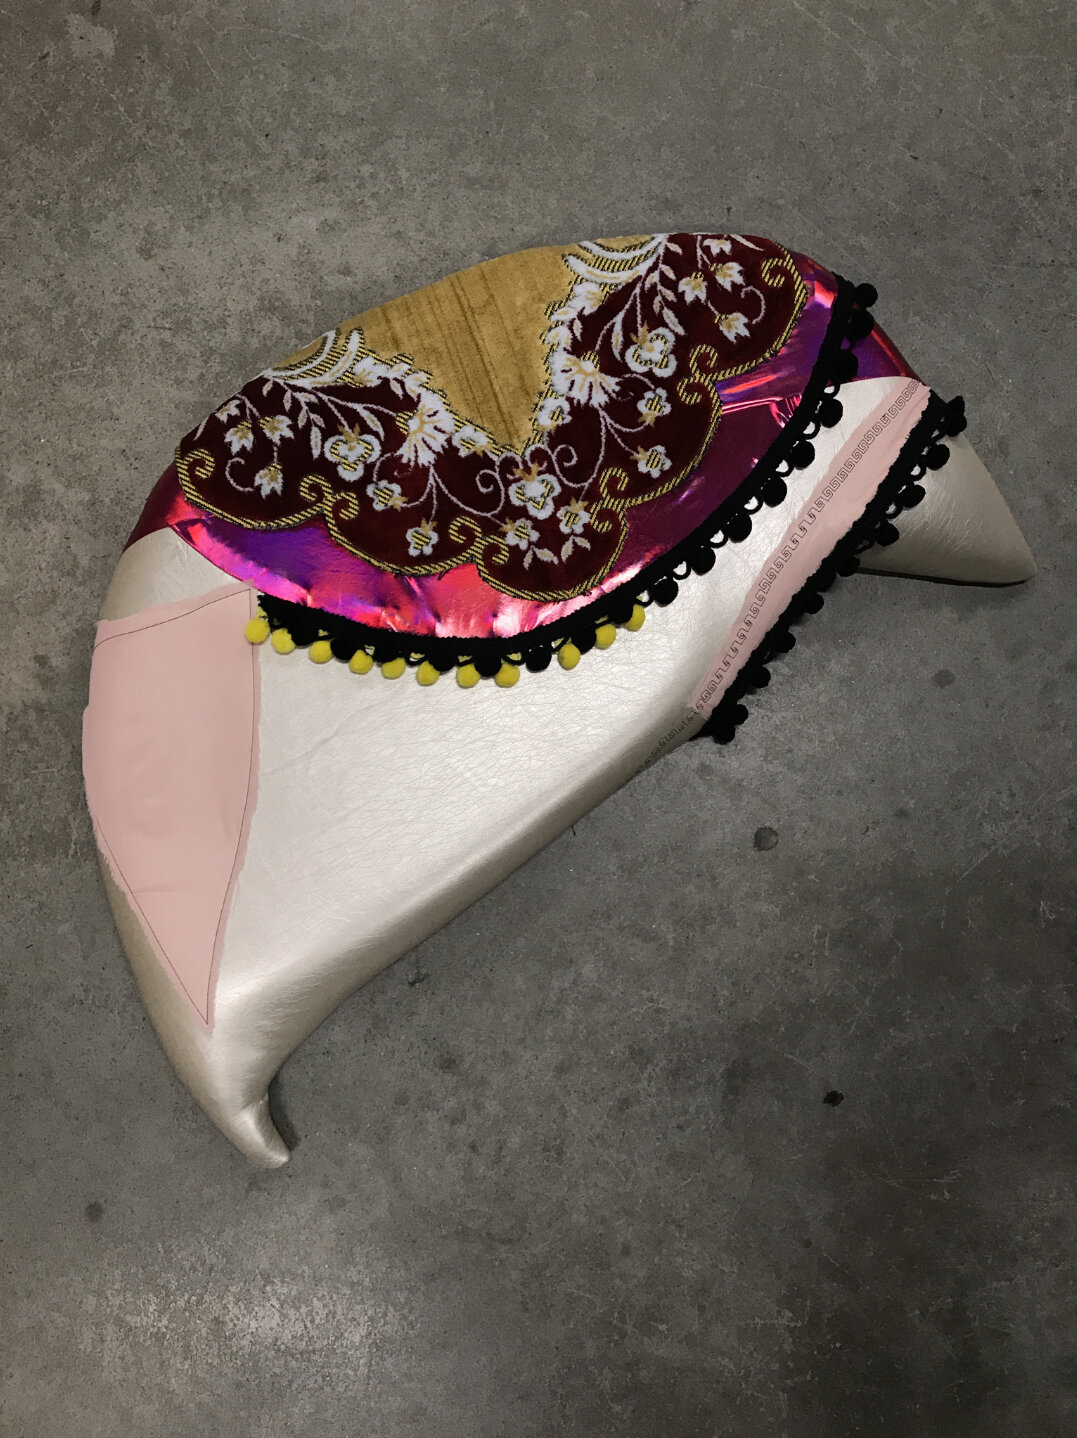 Baseera Khan, Seat 20, Pink and Red, 2019. Pleather, trimmings, prayer rug, chiffon, 24 × 27 × 3 inches